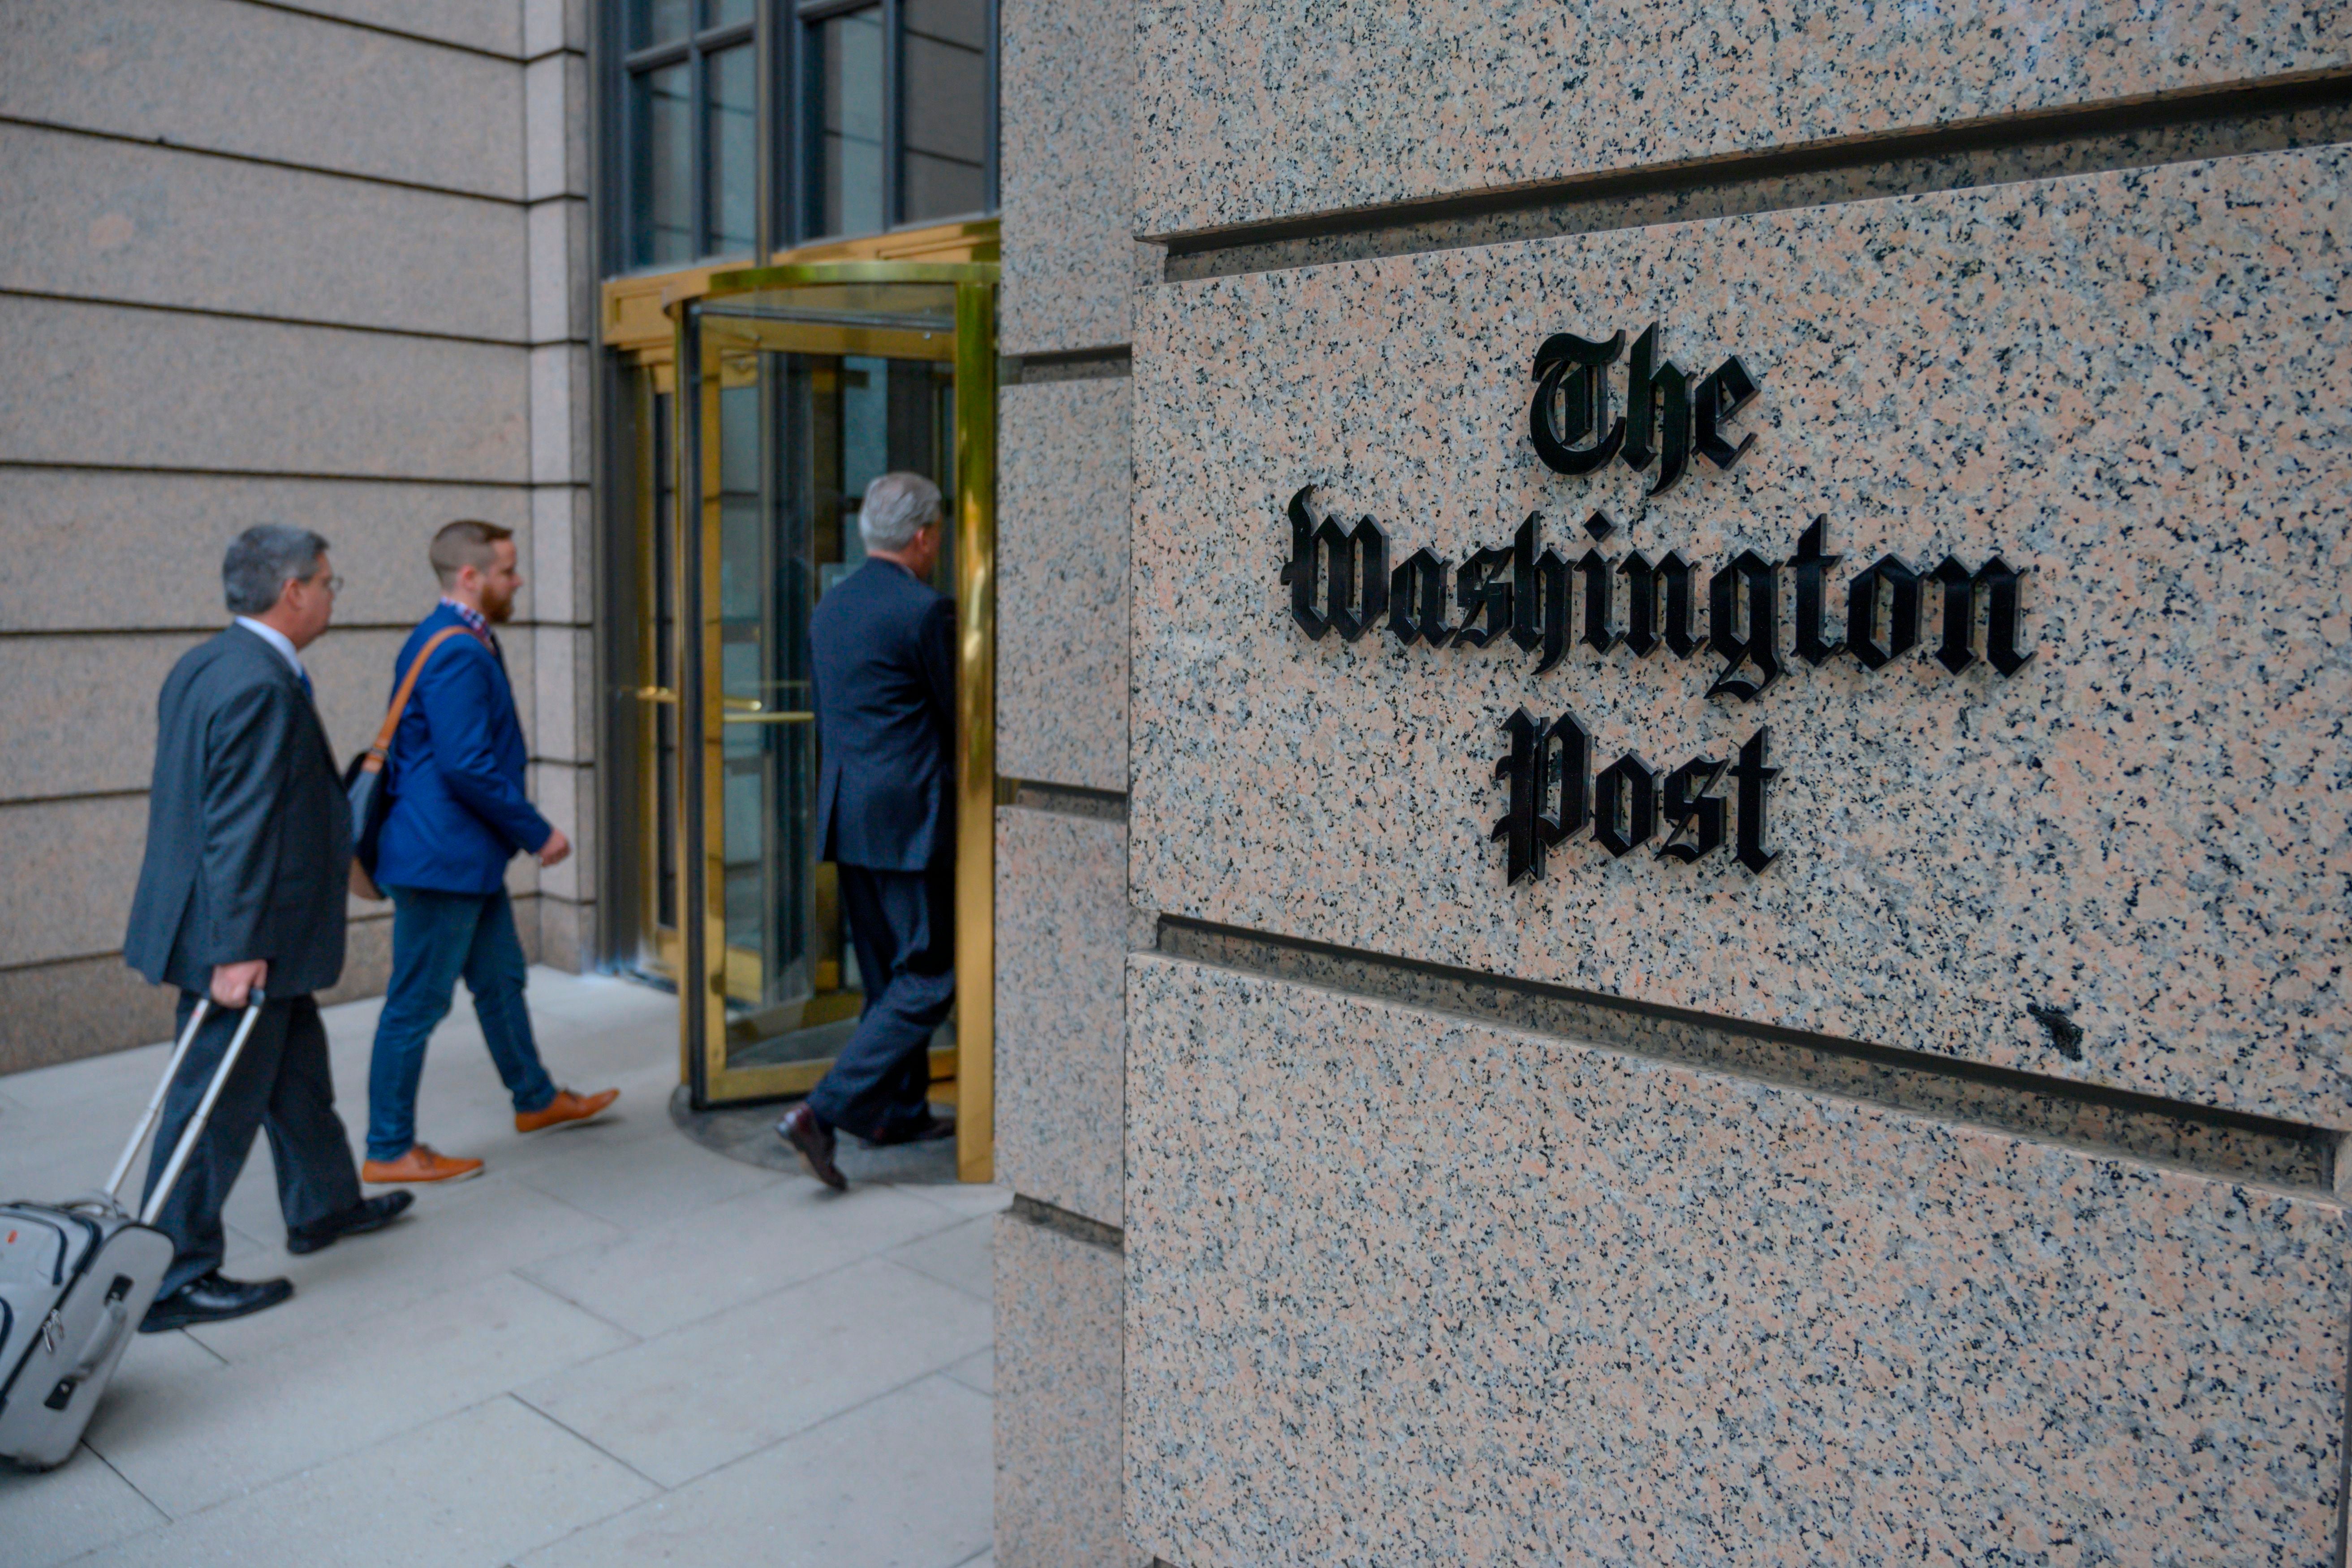 The building of the Washington Post newspaper headquarter is seen on K Street in Washington DC on May 16, 2019.